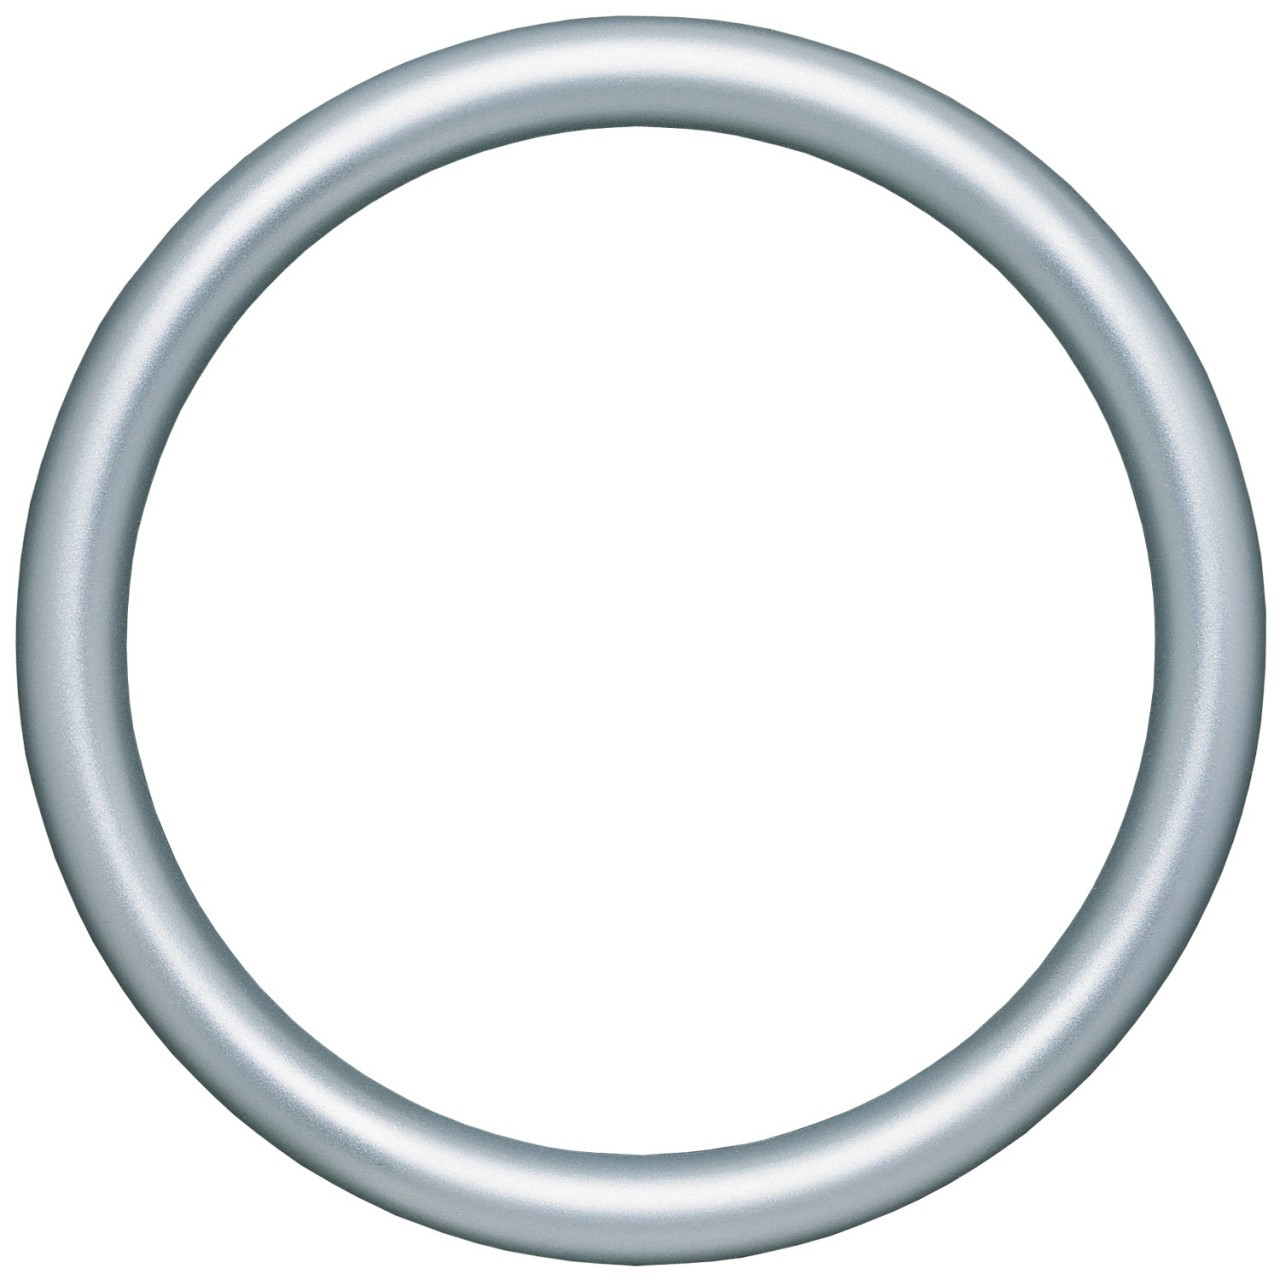 Round Frame in Silver Spray Finish| Silver Paint Round Picture Frames ...